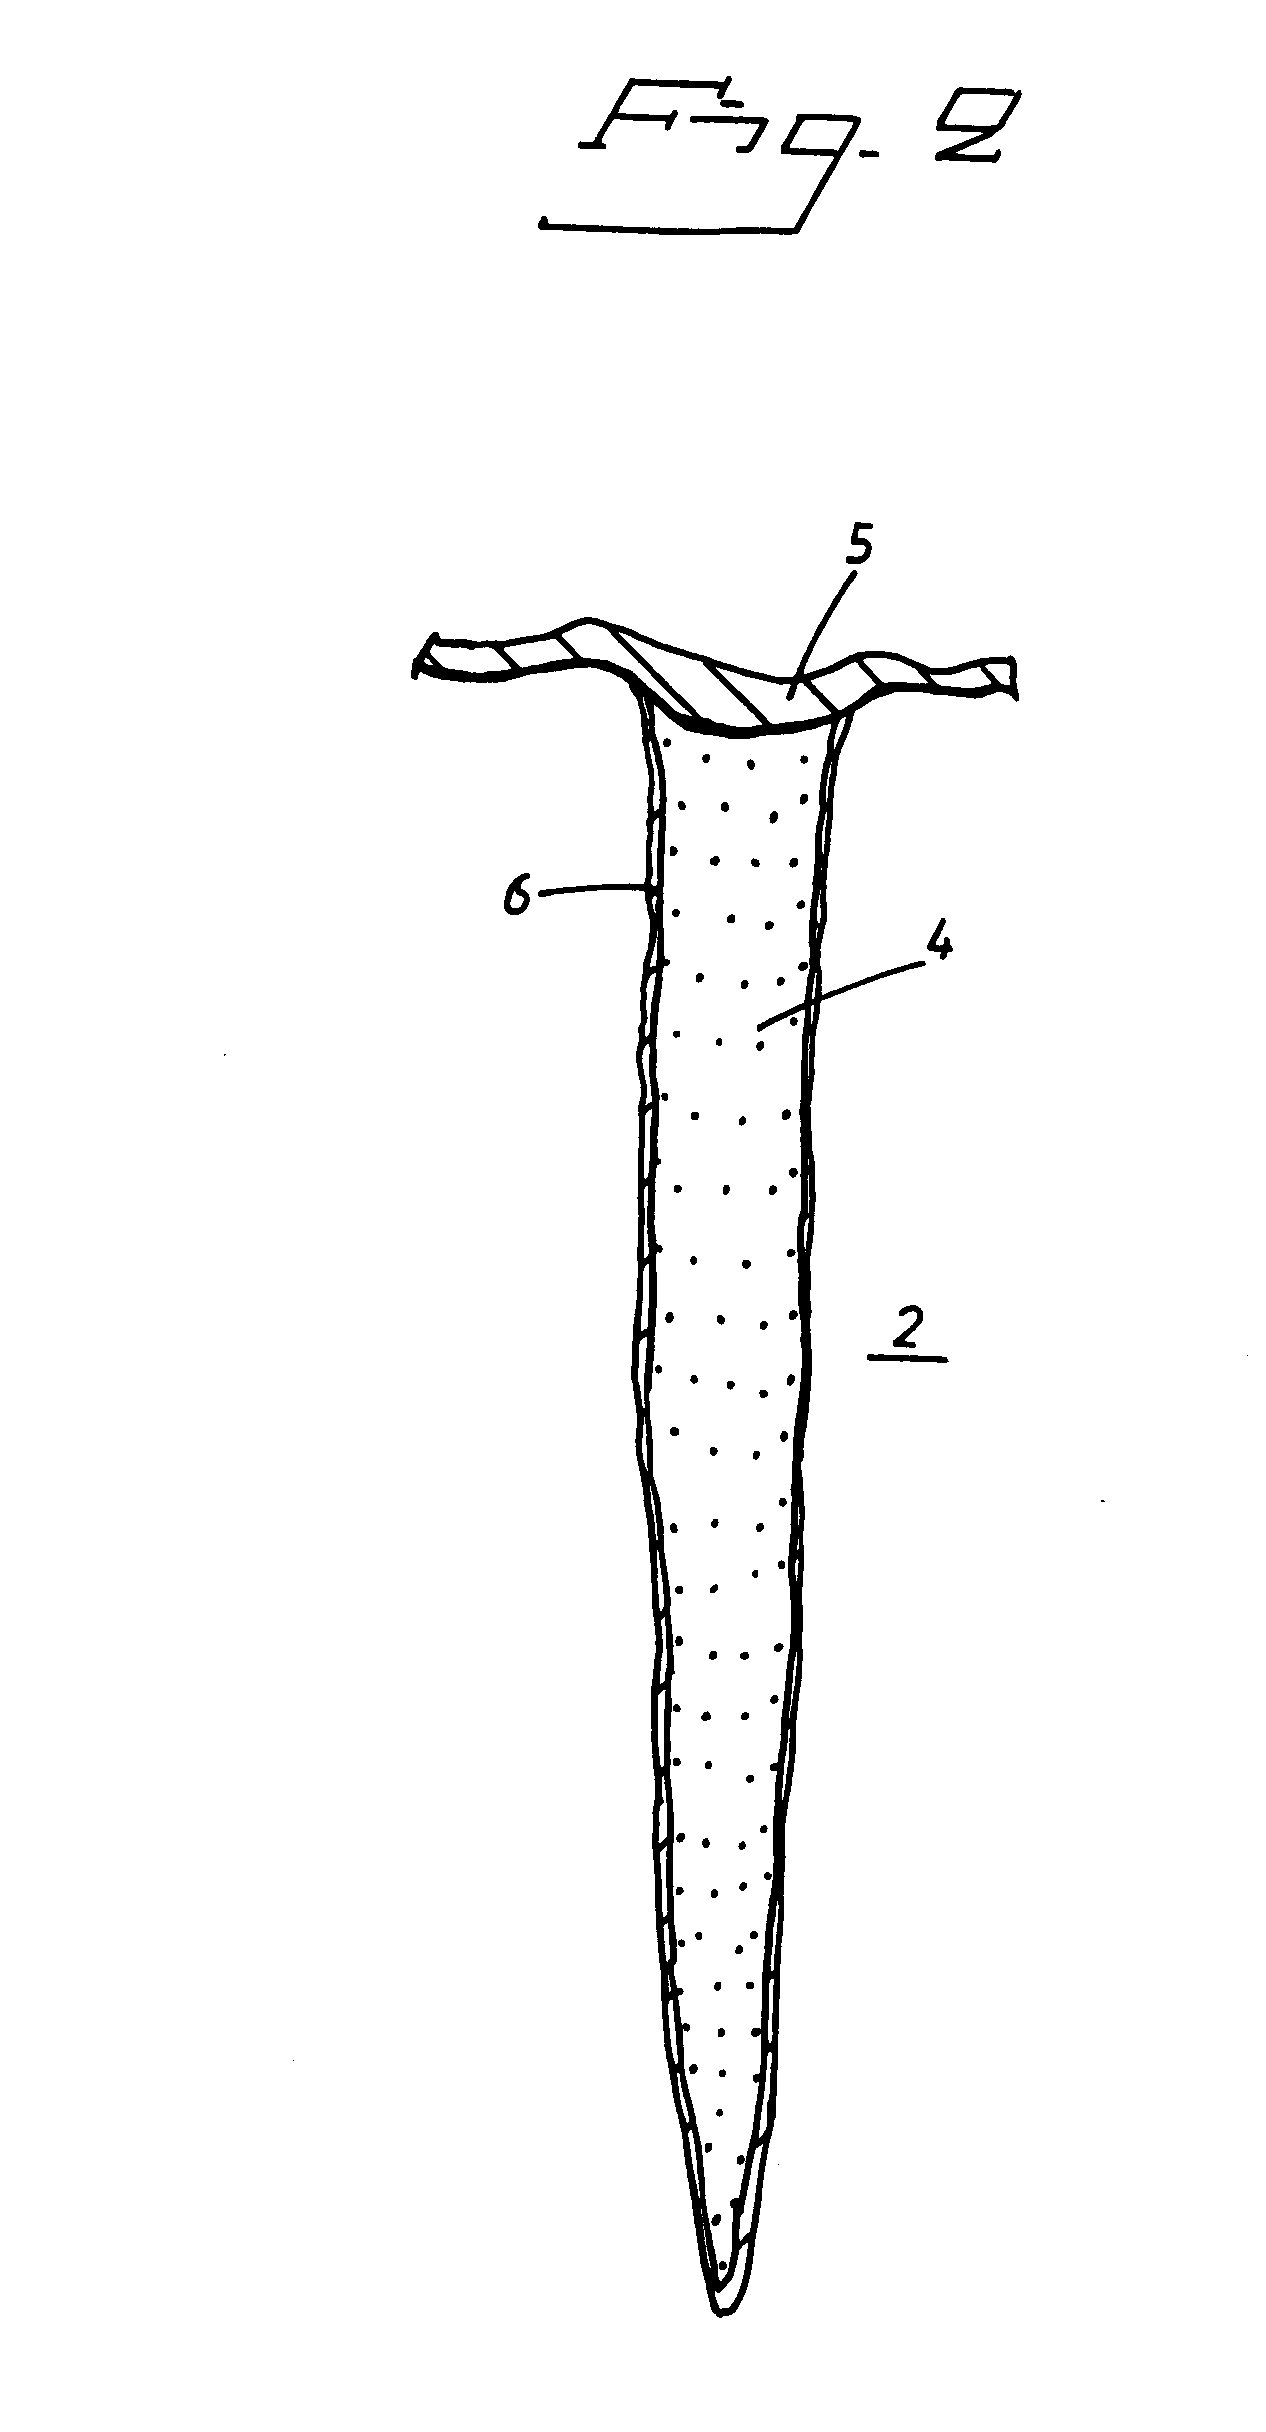 Pyrotechnic priming charge comprising a porous material